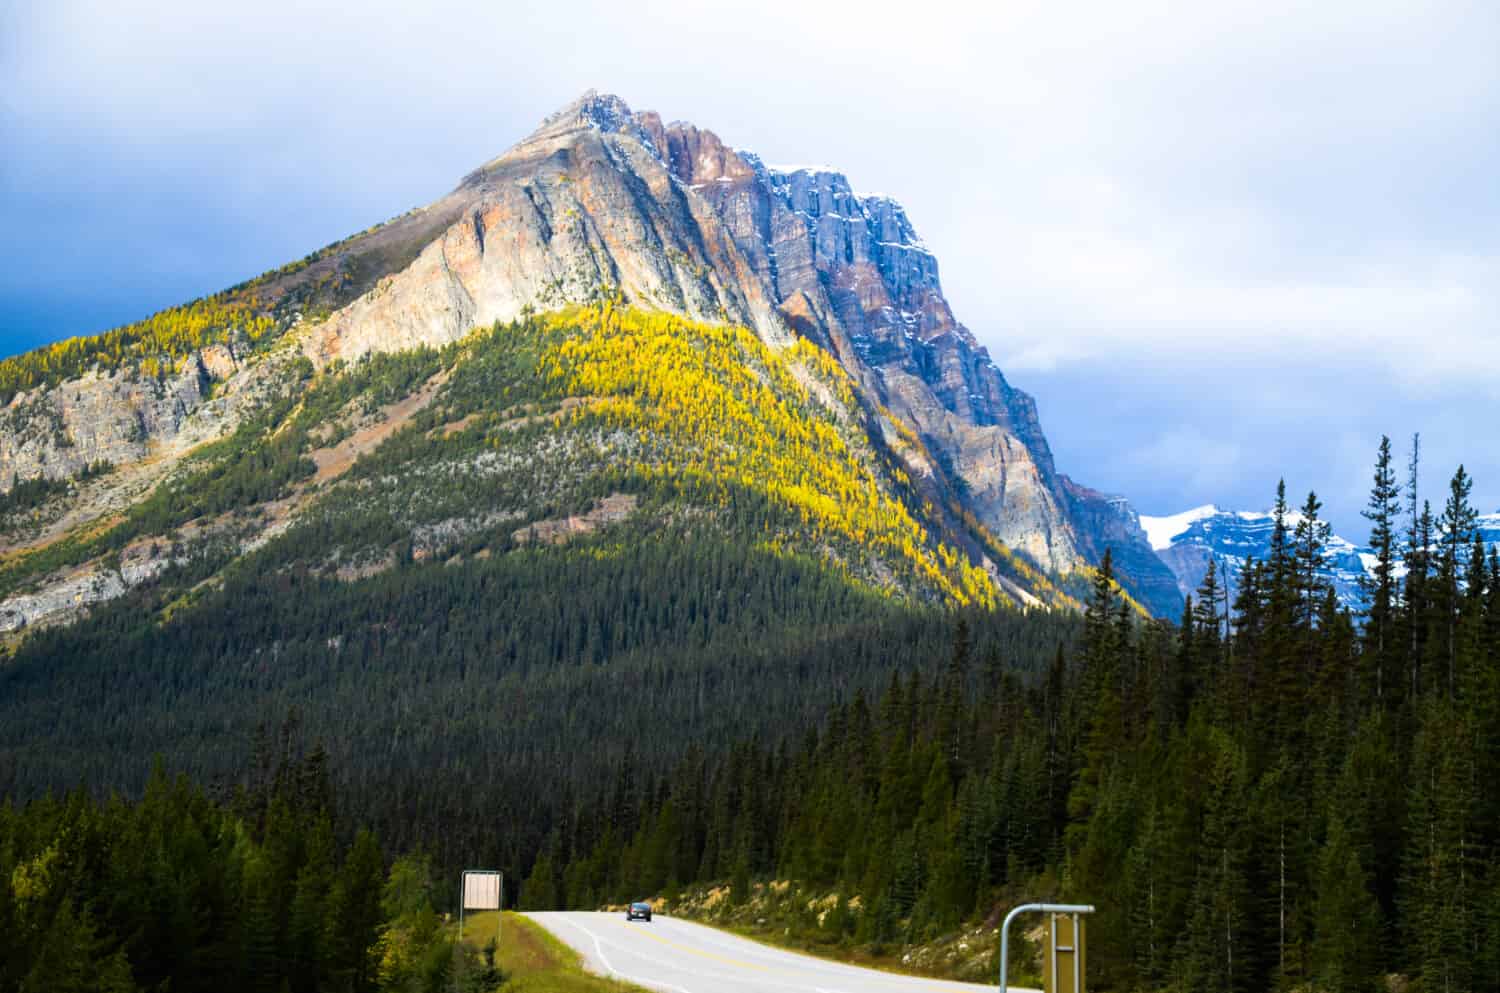 Mountain range of Kootenay National Park with yellow leaves and Kootenay Highway in Autumn, Canadian Rockies, British Columbia, Canada